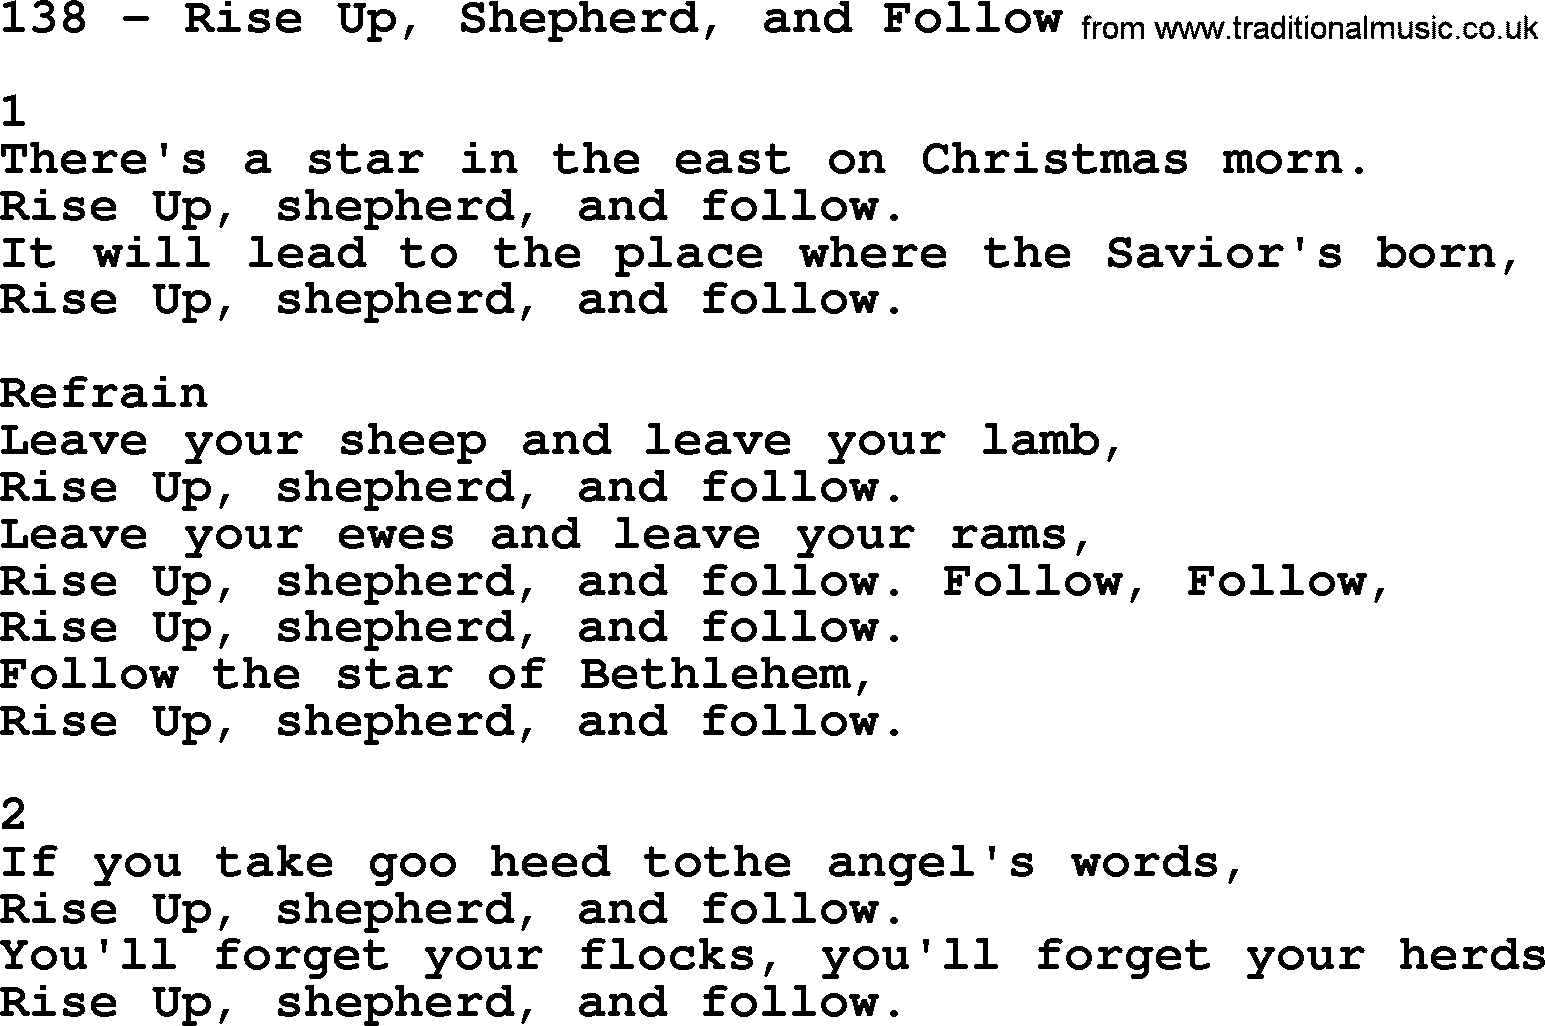 Complete Adventis Hymnal, title: 138-Rise Up, Shepherd, And Follow, with lyrics, midi, mp3, powerpoints(PPT) and PDF,